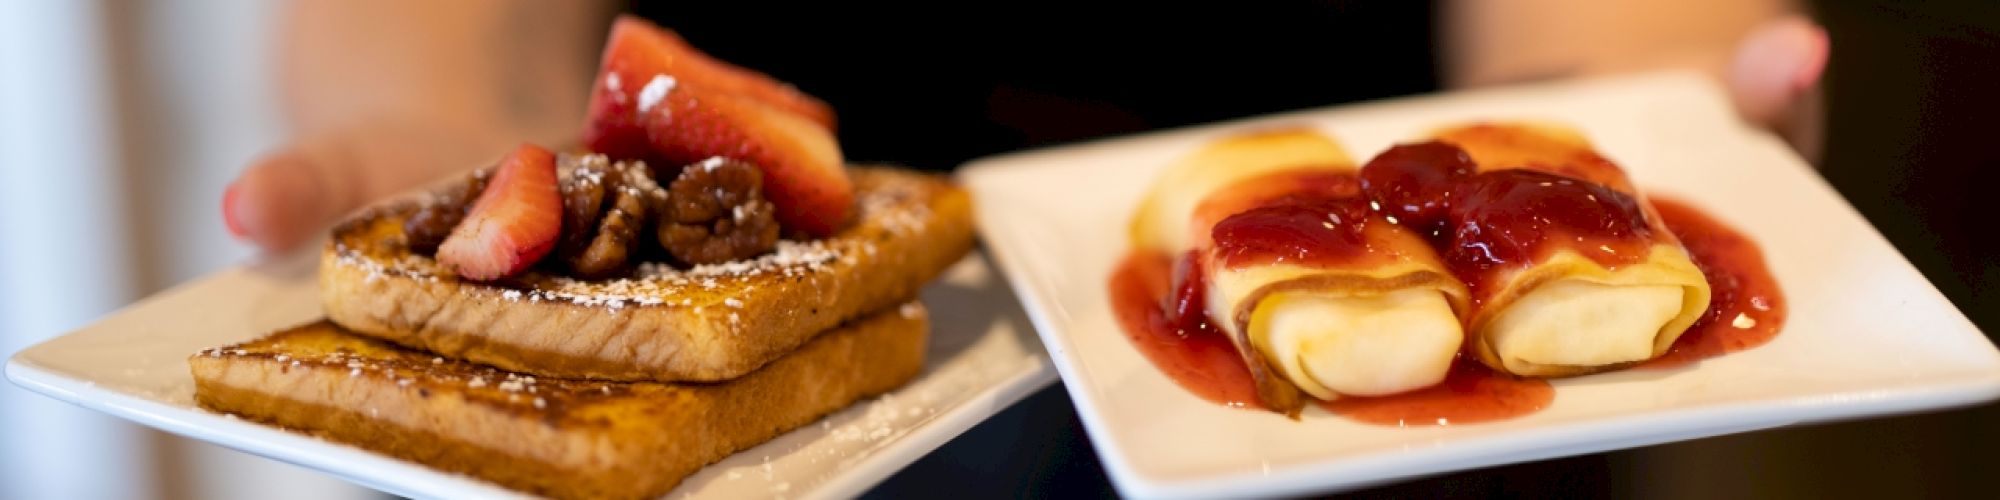 A person is holding two plates of food: one with French toast topped with strawberries, and one with crepes covered in a red sauce.